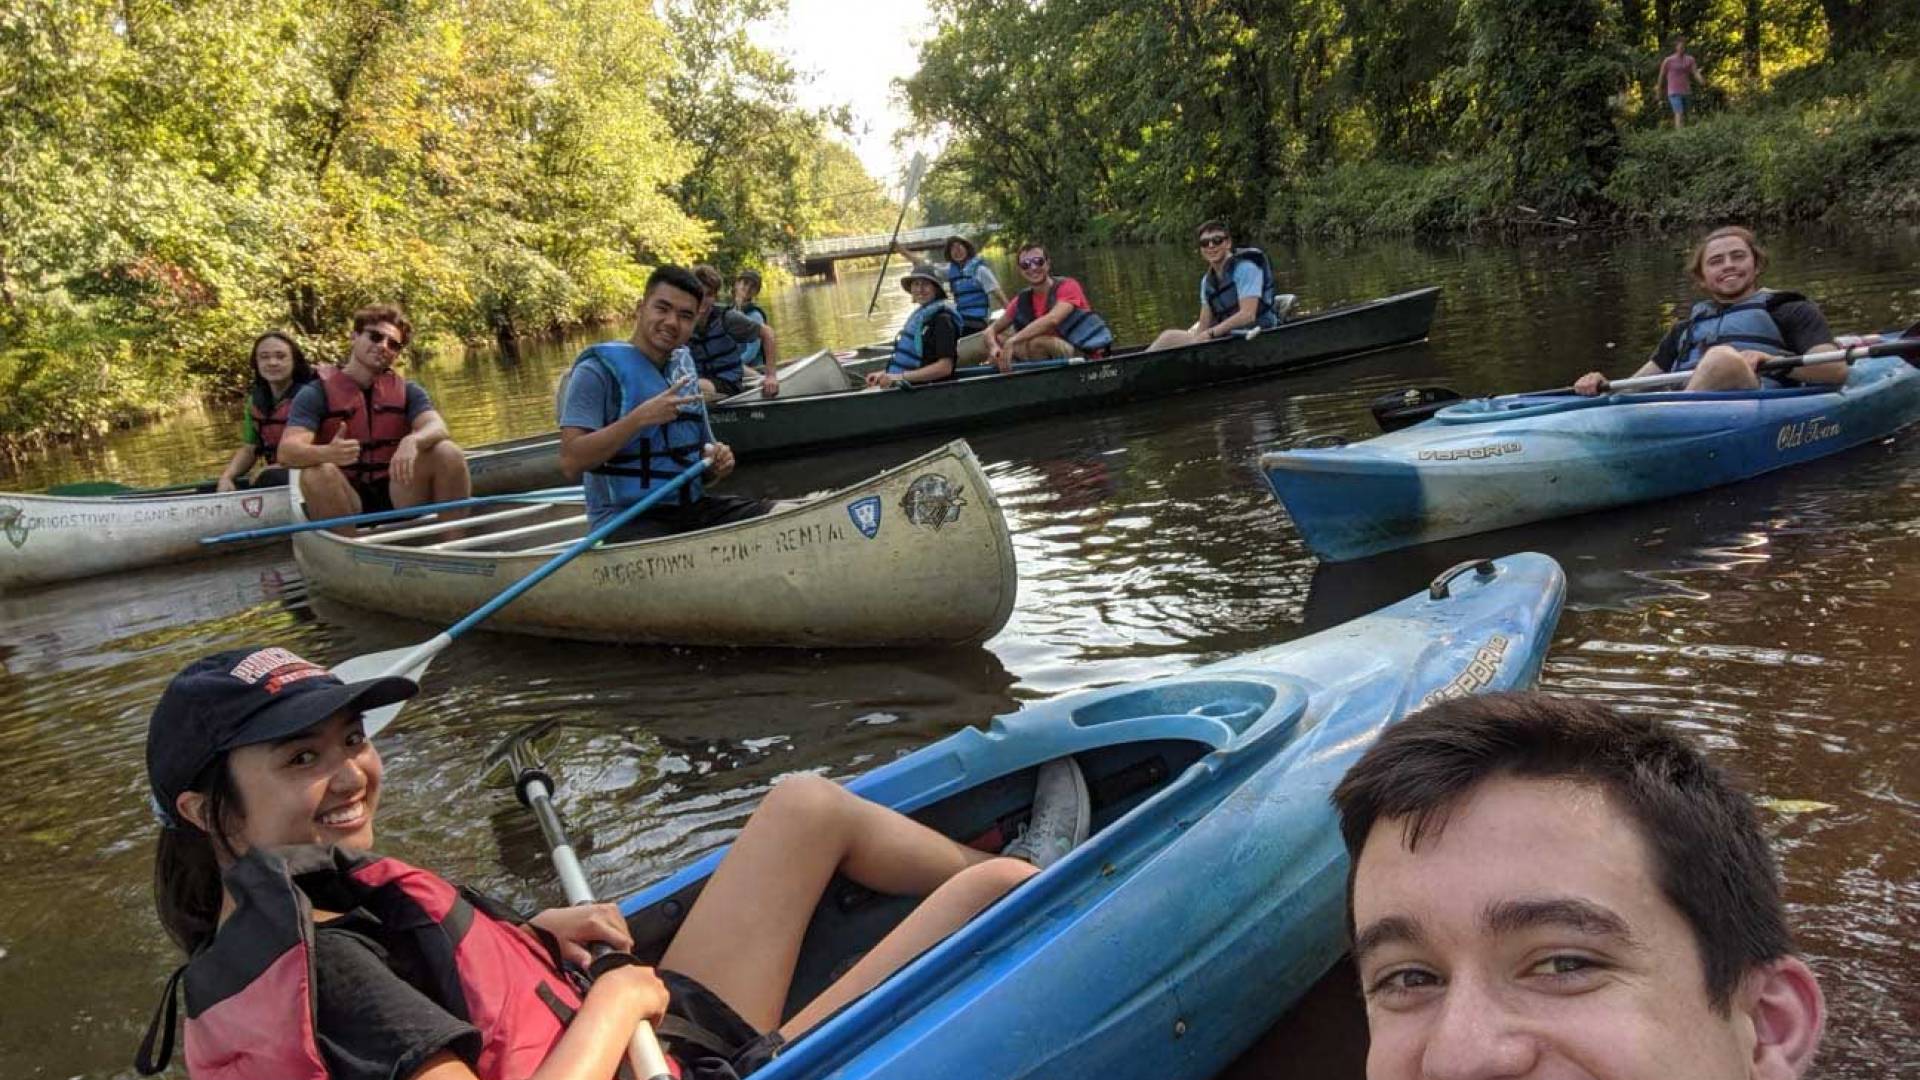 Students in kayaks on the water